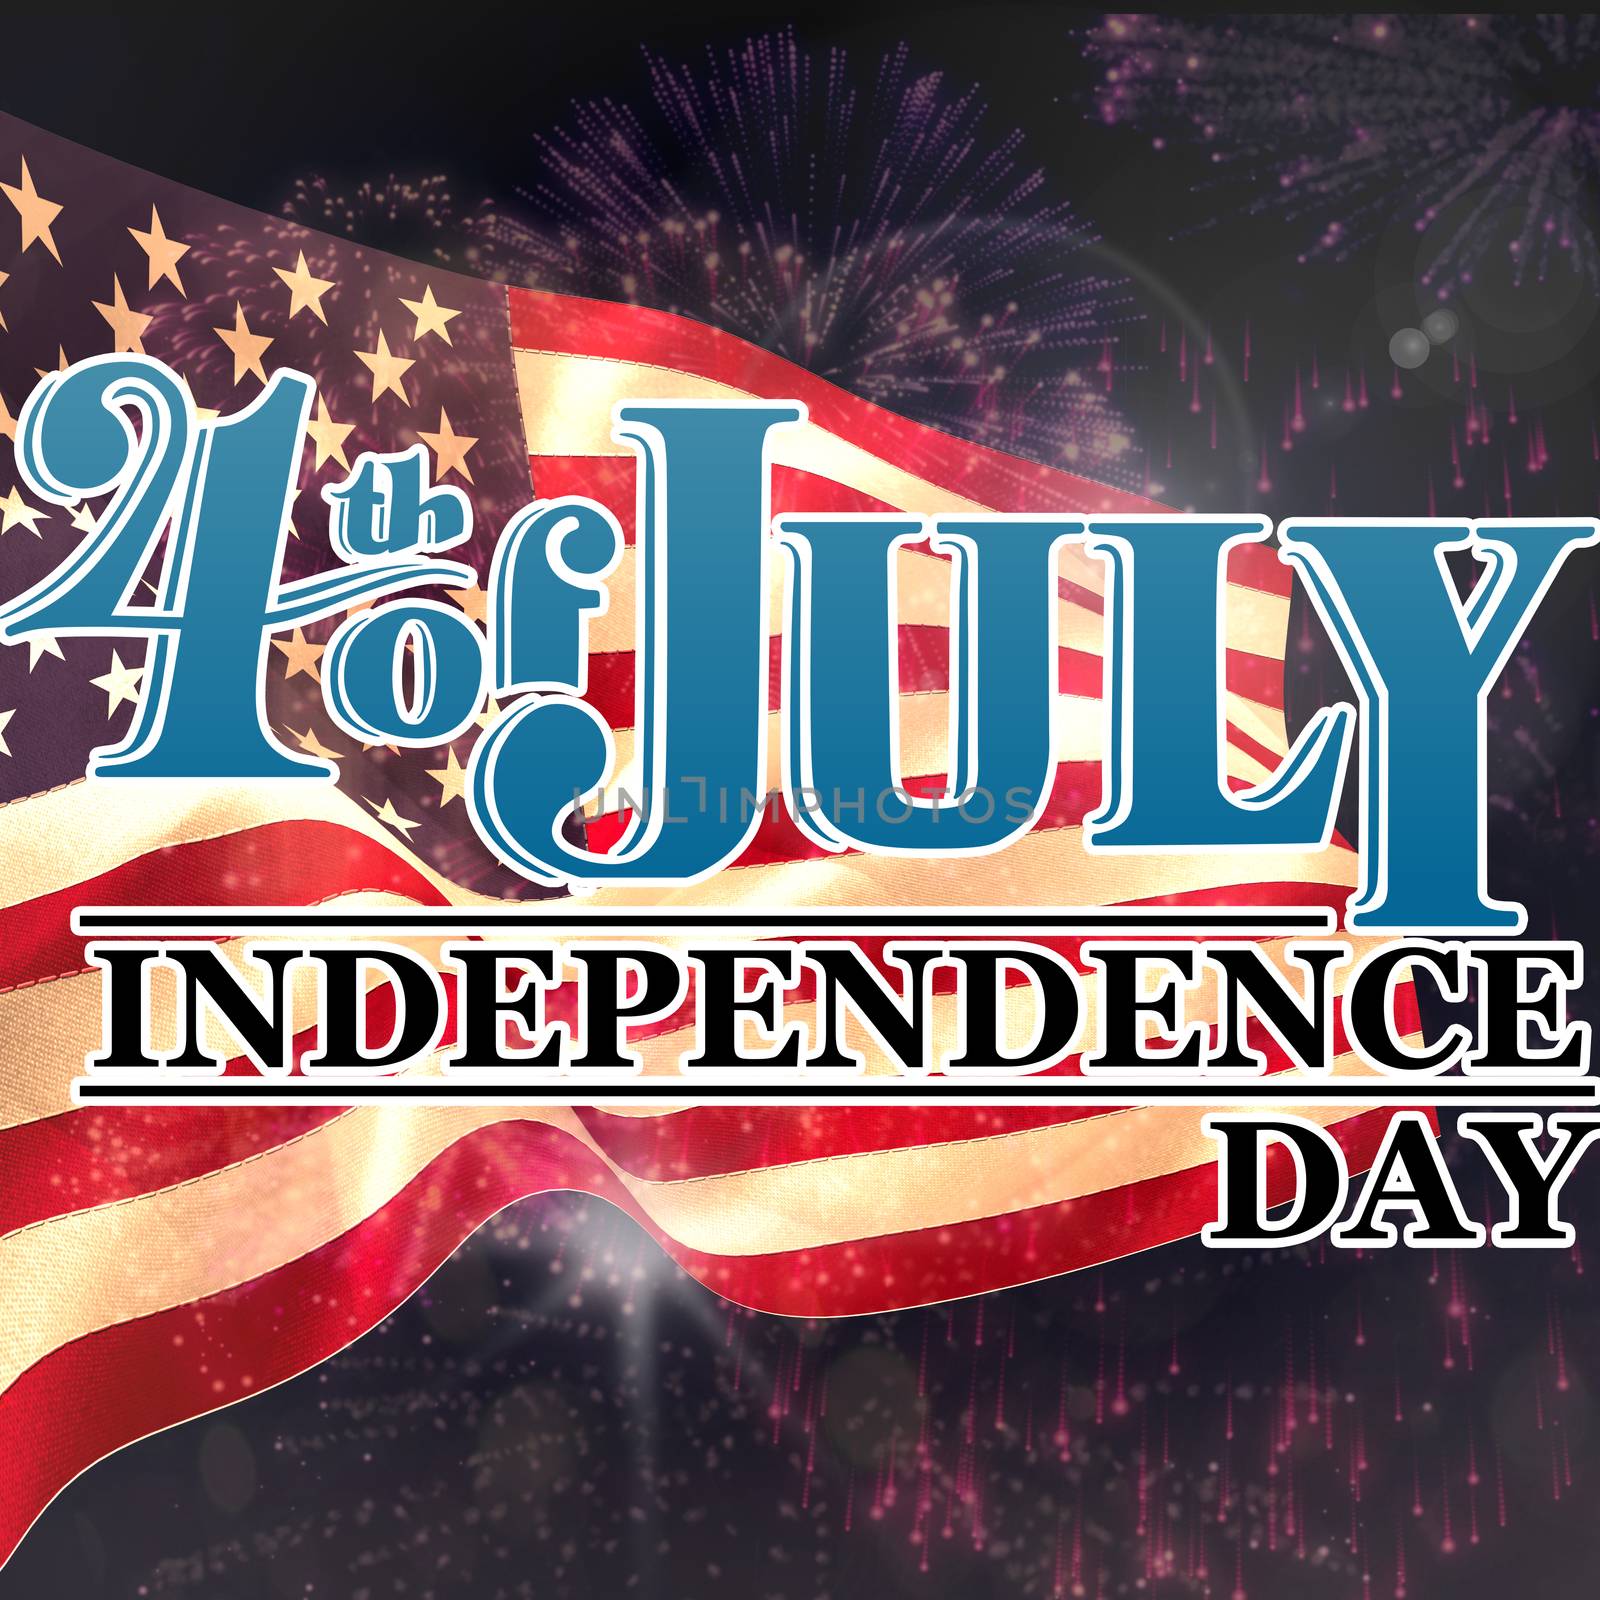 Independence day graphic against colourful fireworks exploding on black background